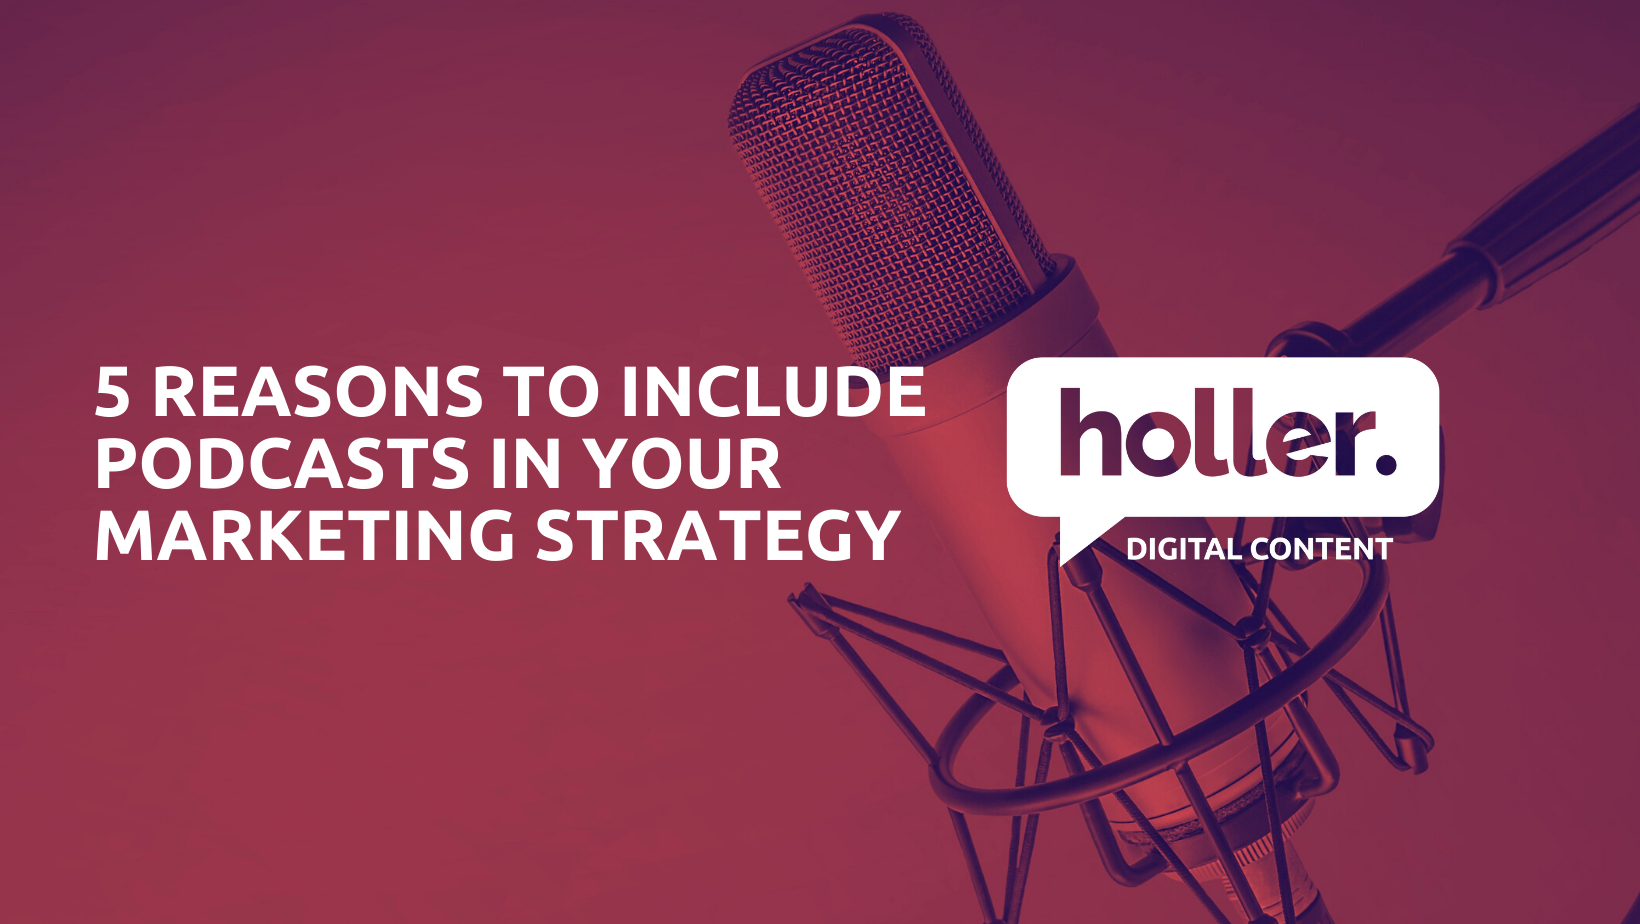 5 REASONS TO INCLUDE PODCASTS IN YOUR MARKET STRATEGY